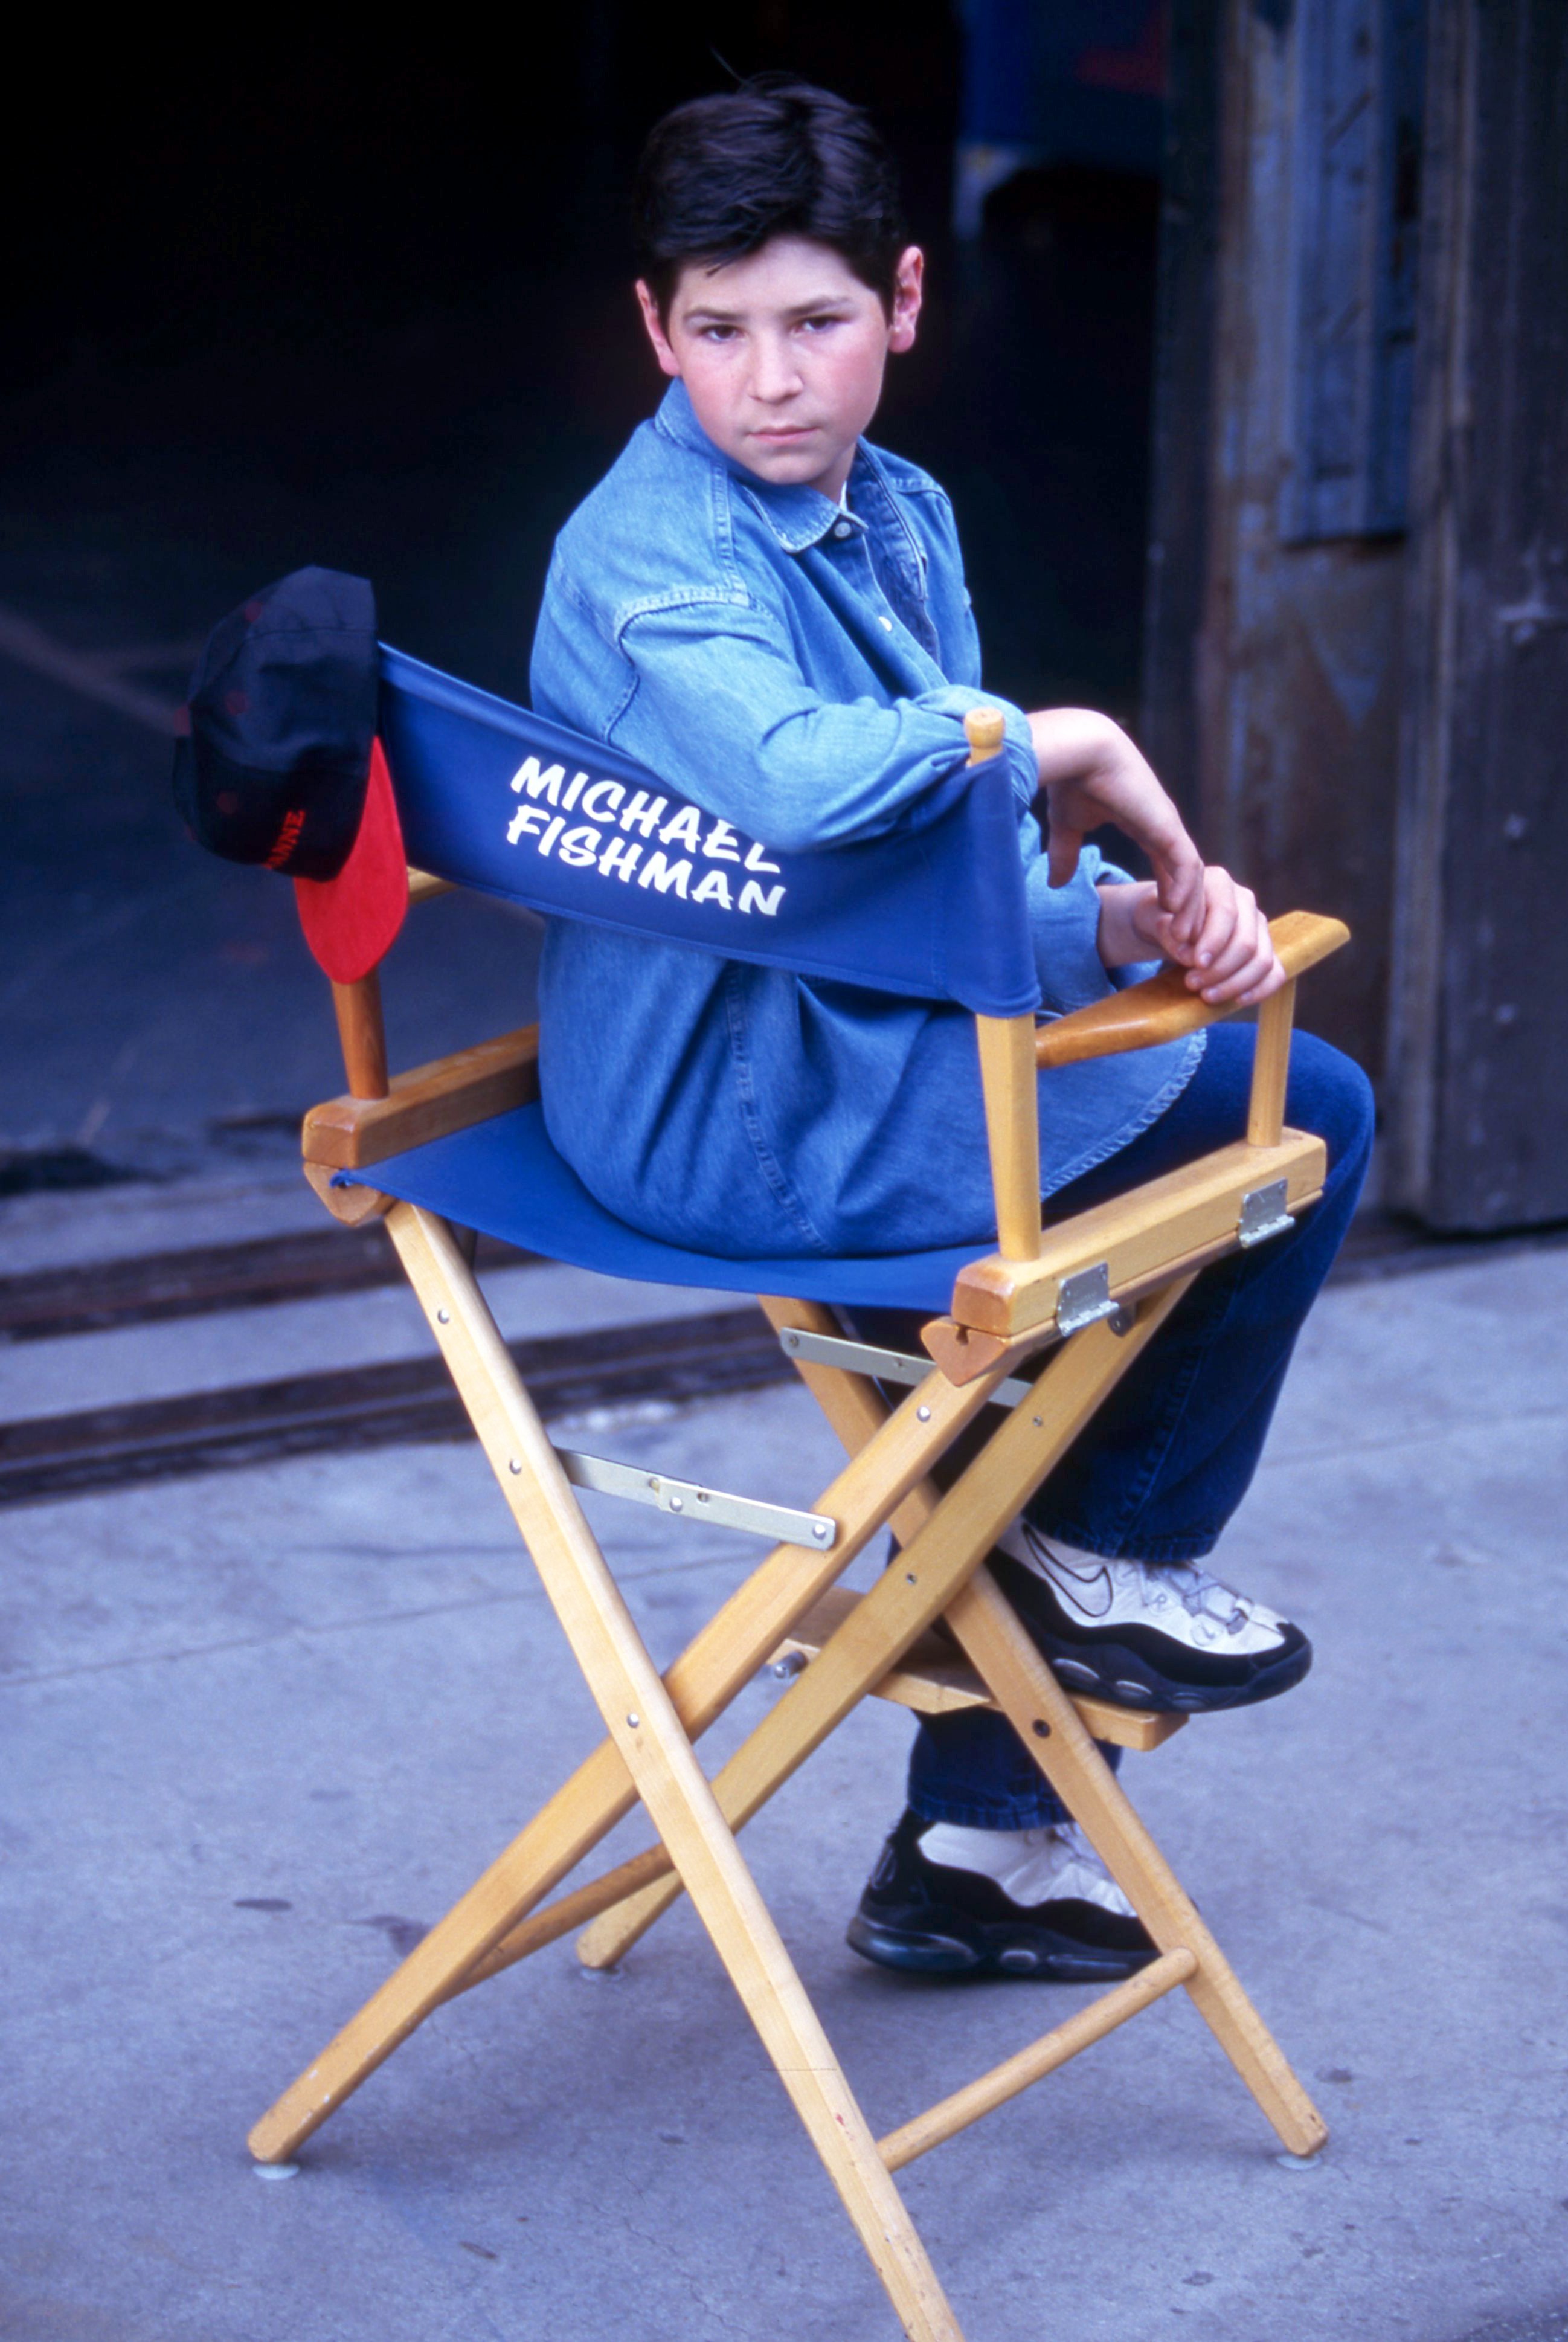 Michael Fishman poses for a portrait on the lot outside of the soundstage for "Roseanne" in 1990 in Los Angeles, California. | Source: Getty Images